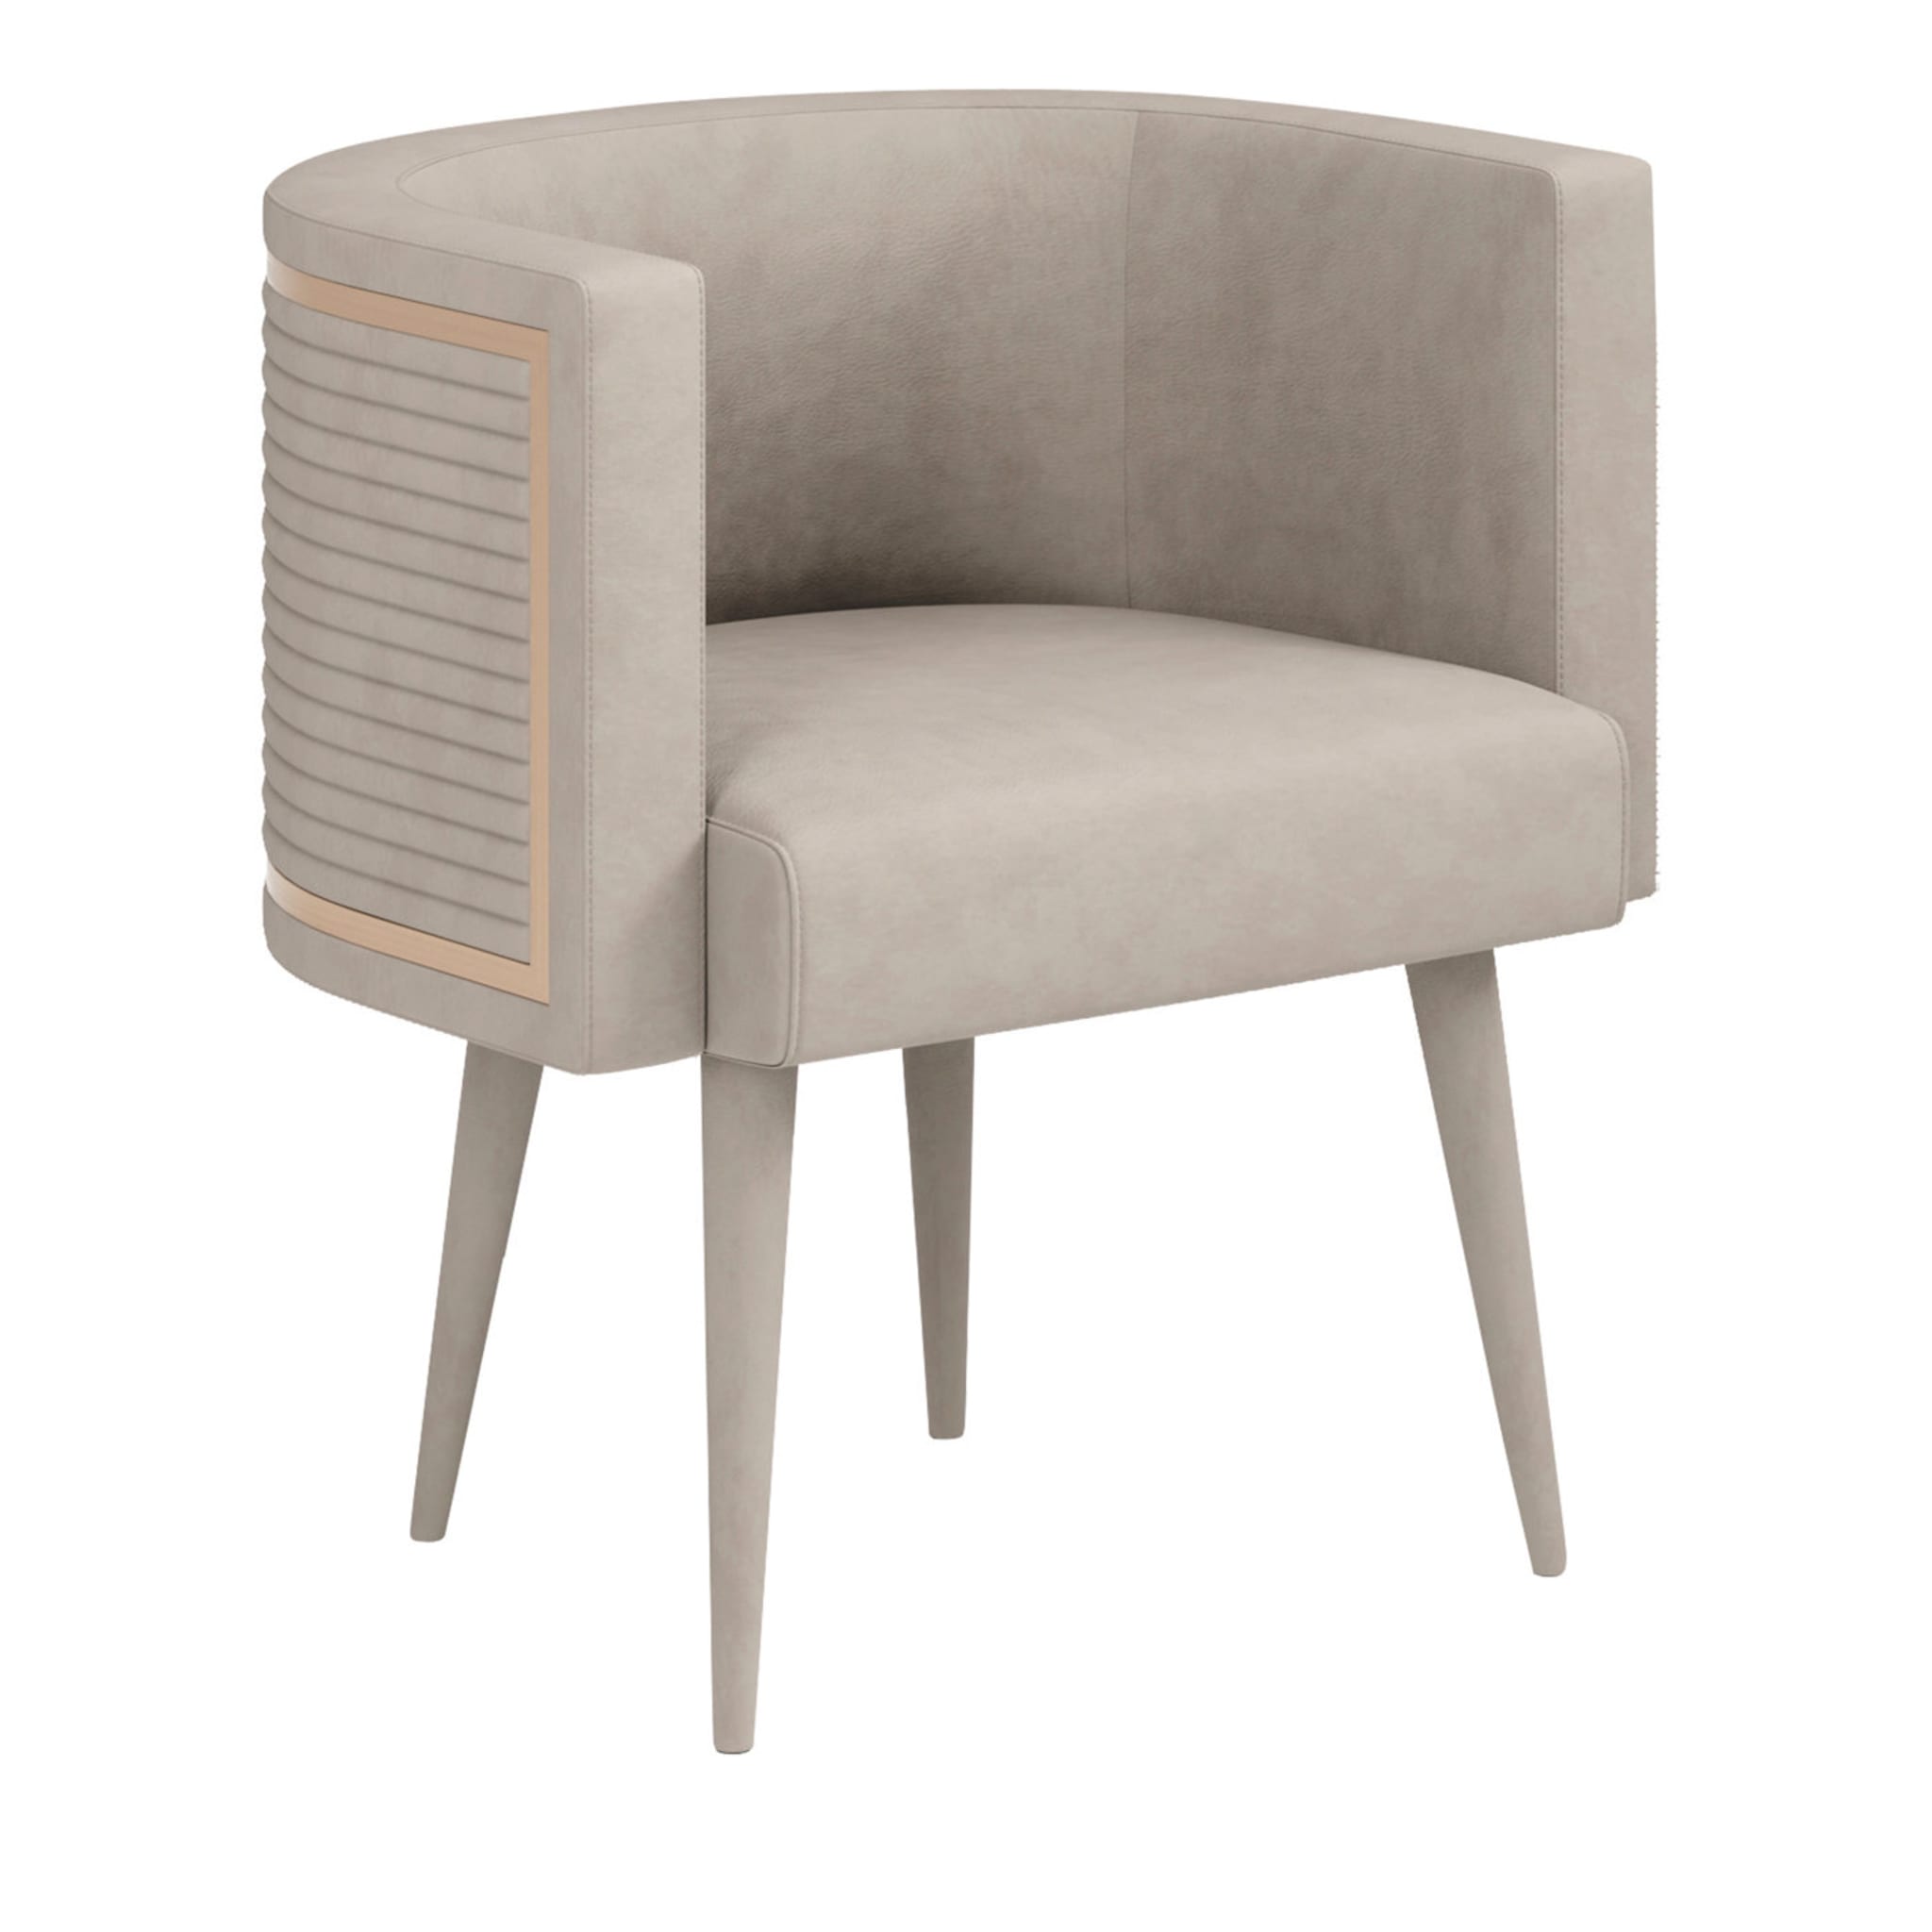 Reseda Chair by Giannella Ventura - Main view